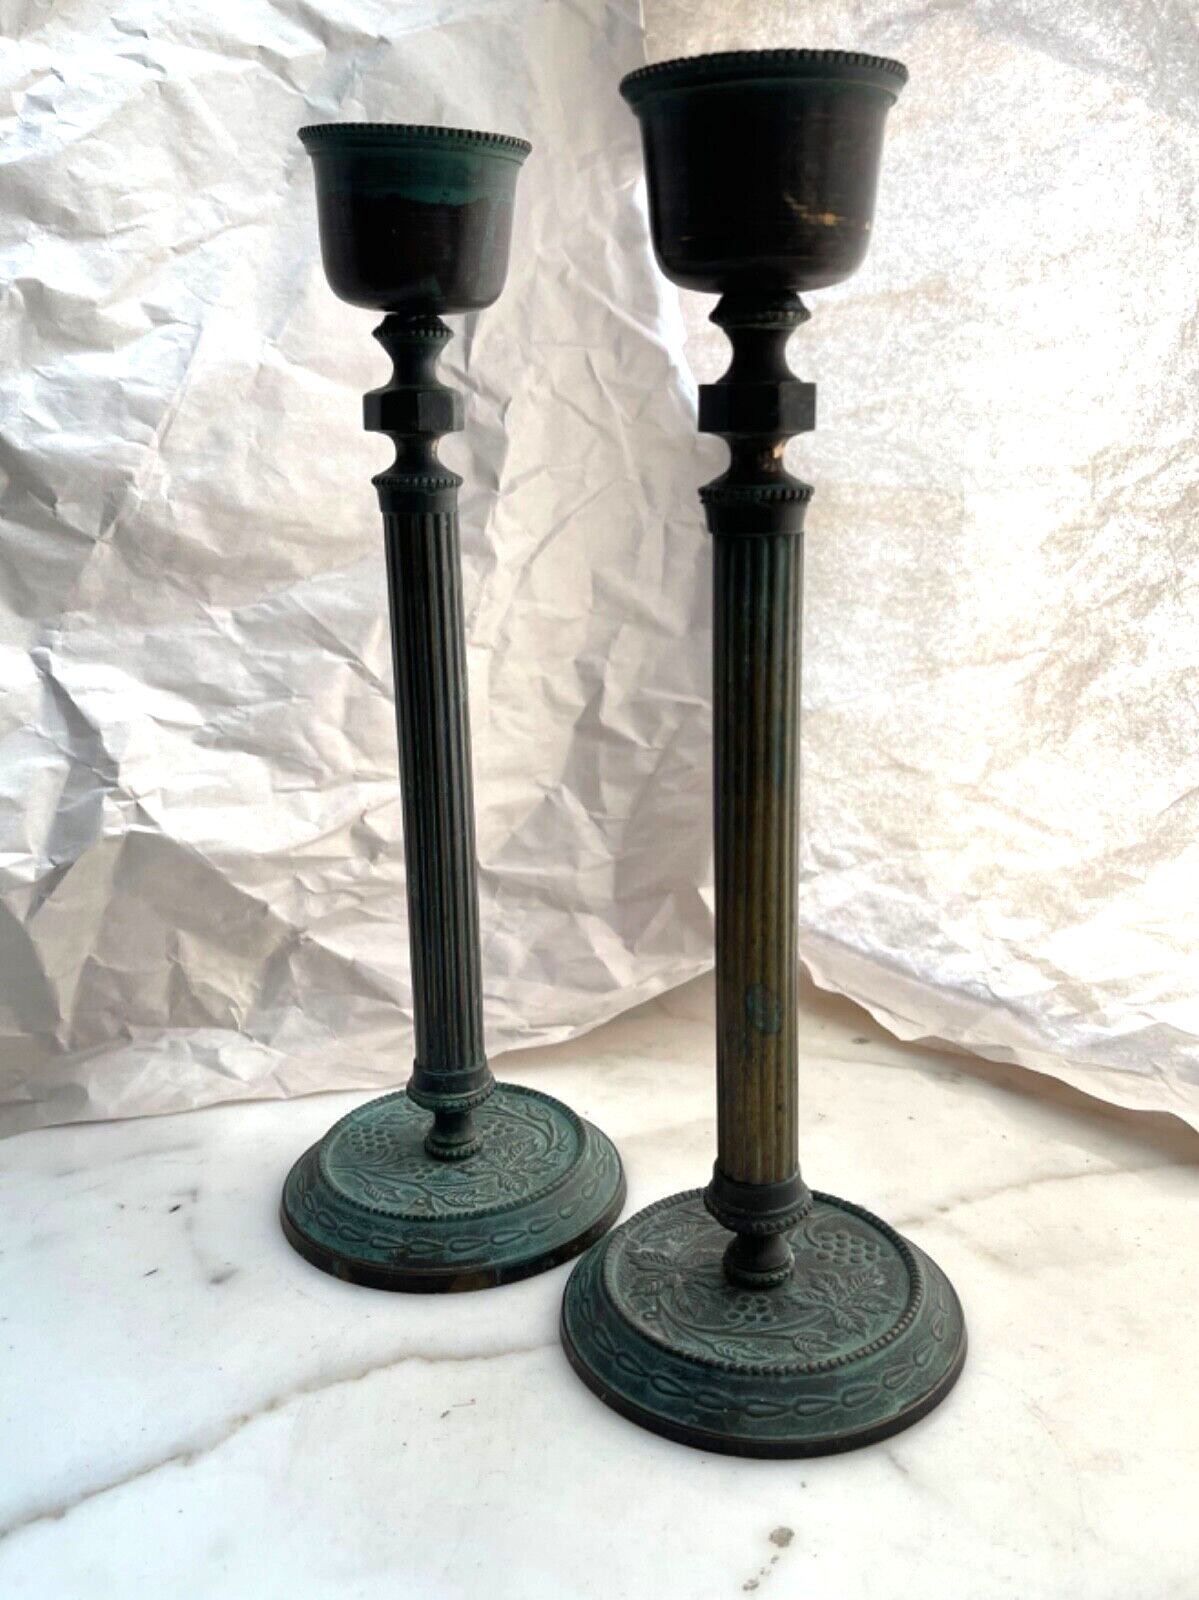 ANTIQUE LATE 18th CENTURY HEAVY SOLID BRONZE CANDLESTICK PAIR